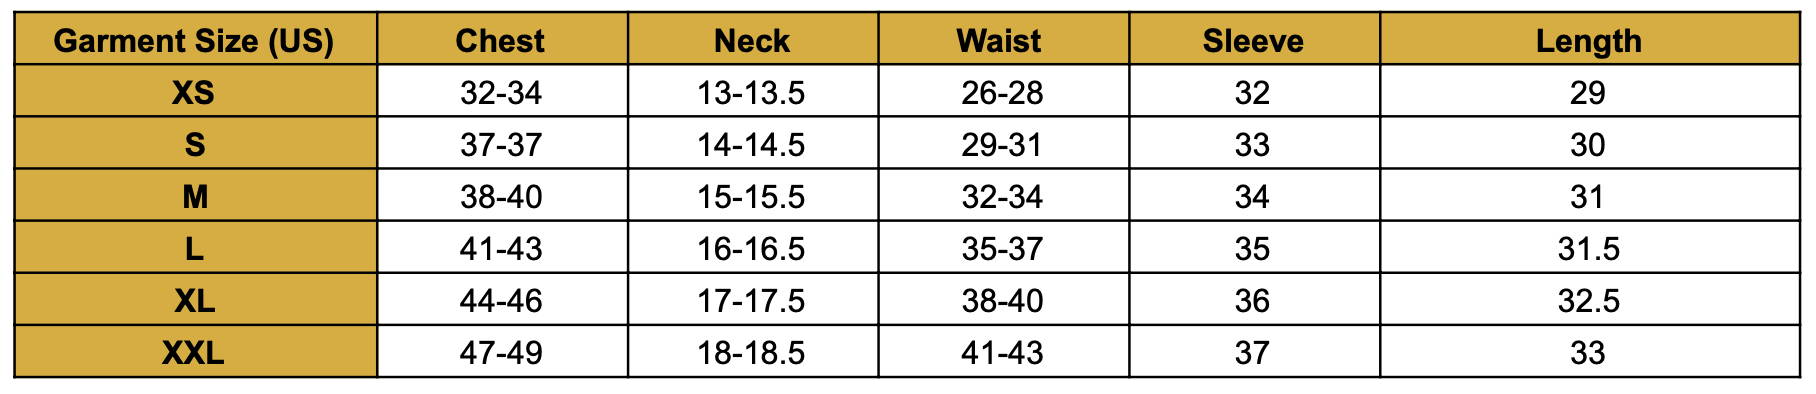 a table displaying the size chart in inches for silk shirts made by 1000 kingdoms including chest, neck, waist, and sleeve measurements for sizes XS, S, M, L, XL, and XXL